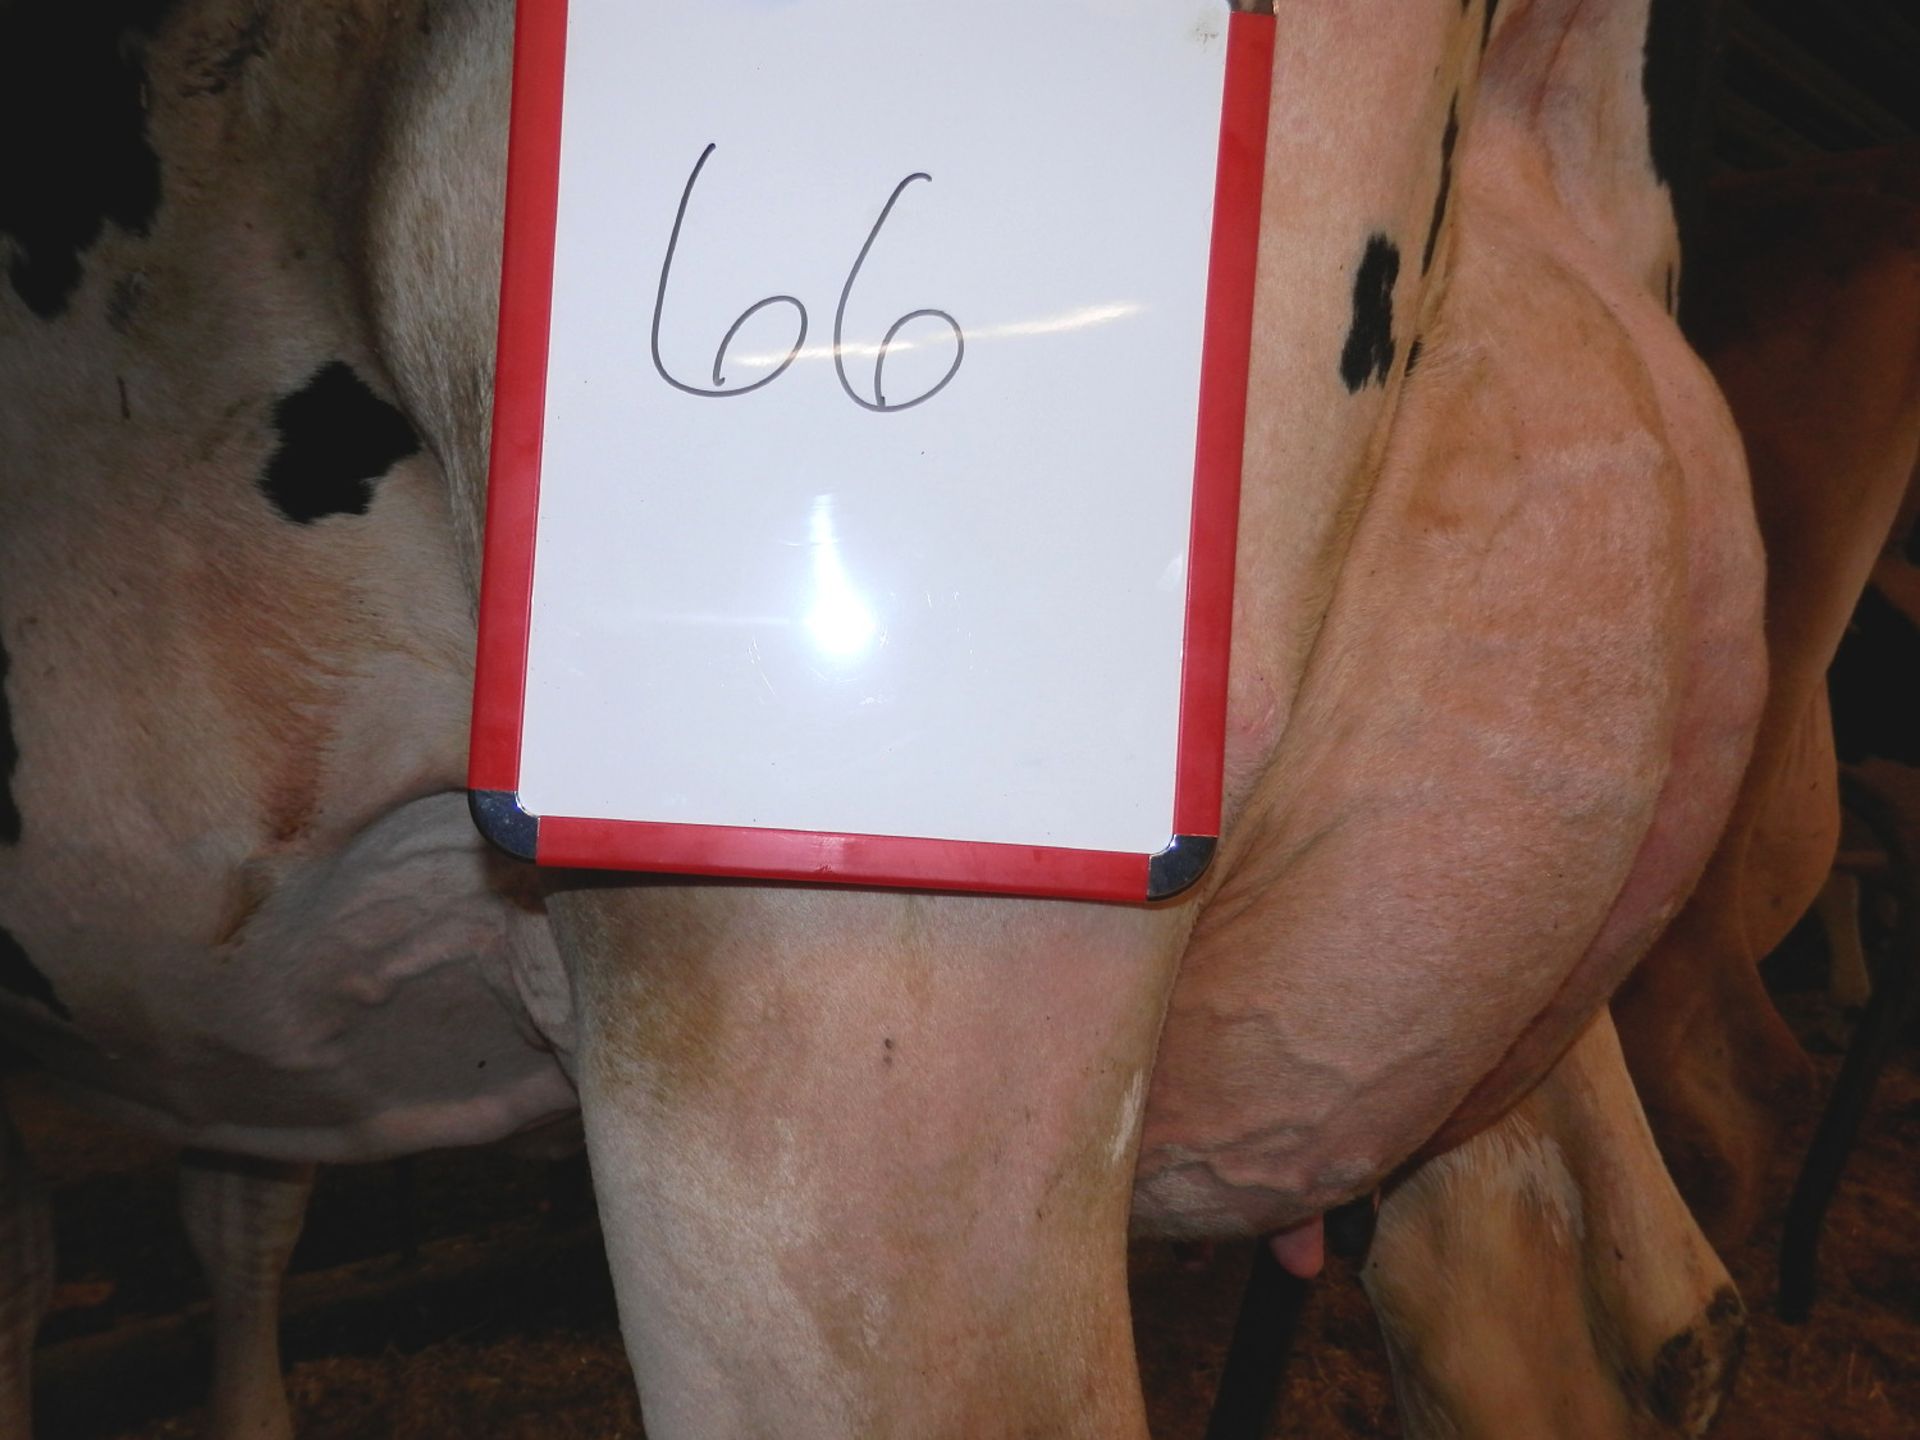 DAIRY COW-LOT 66